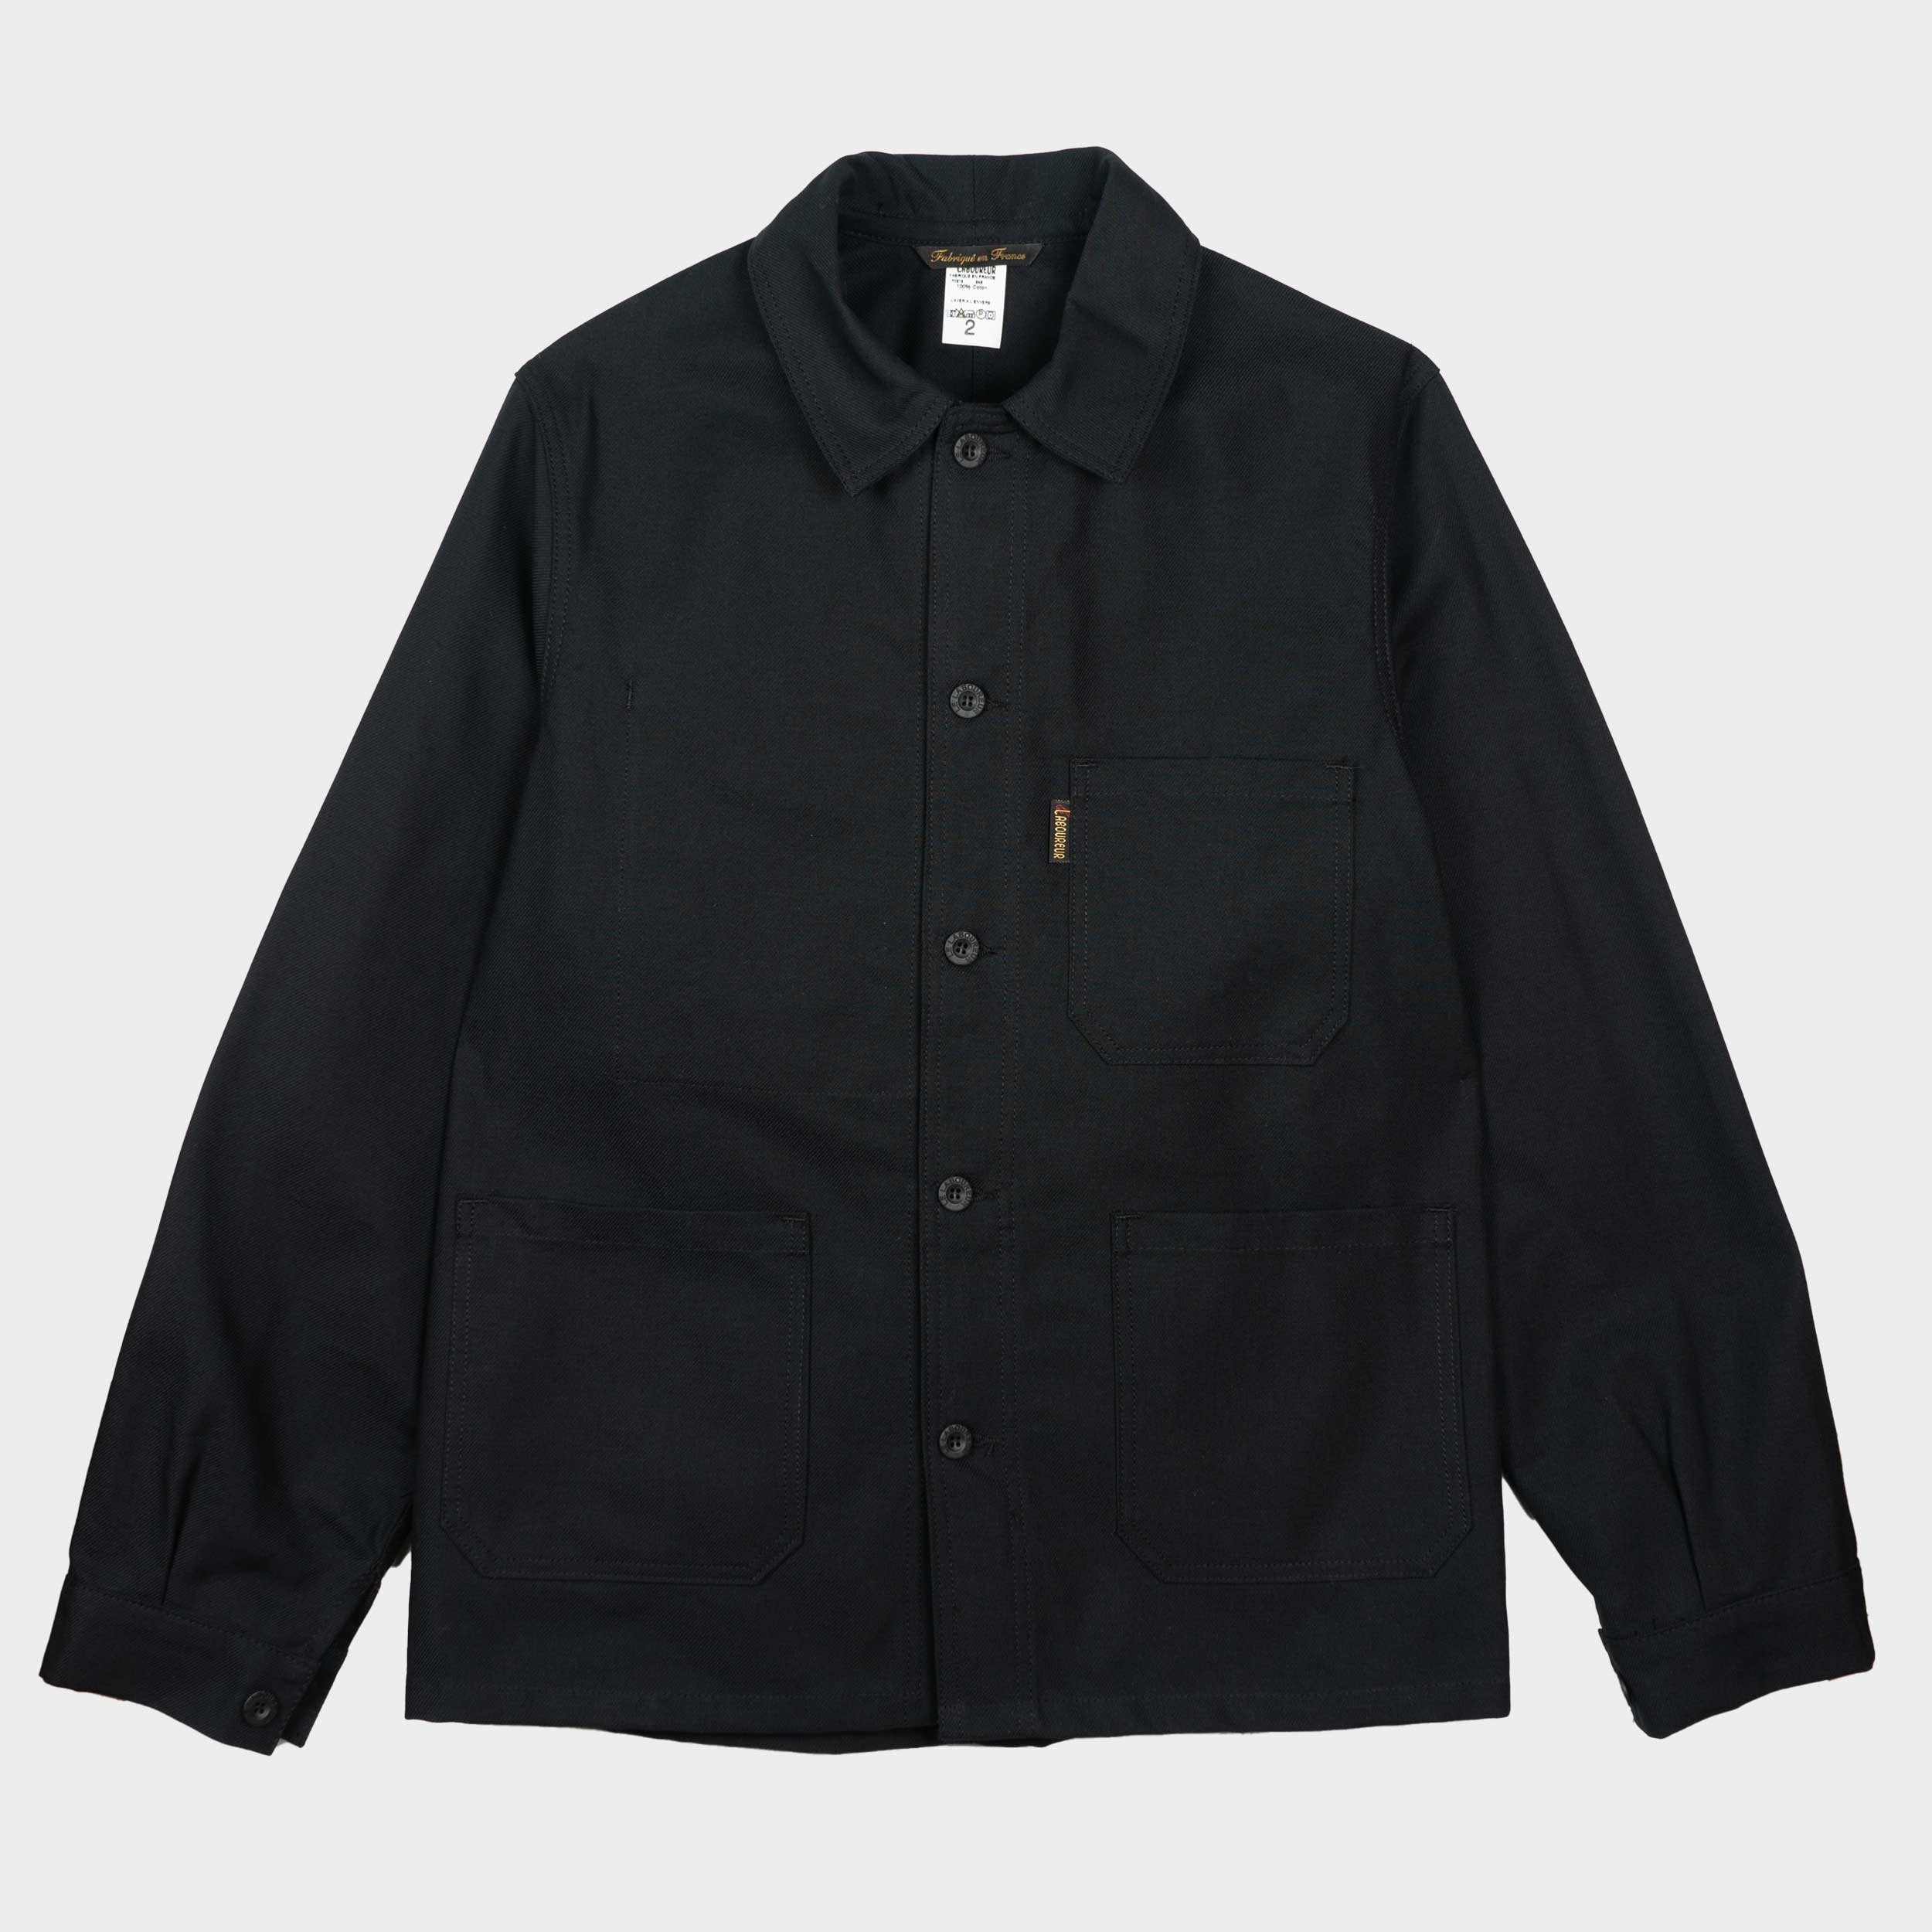 Le Laboureur French Cotton Work Jacket in Black